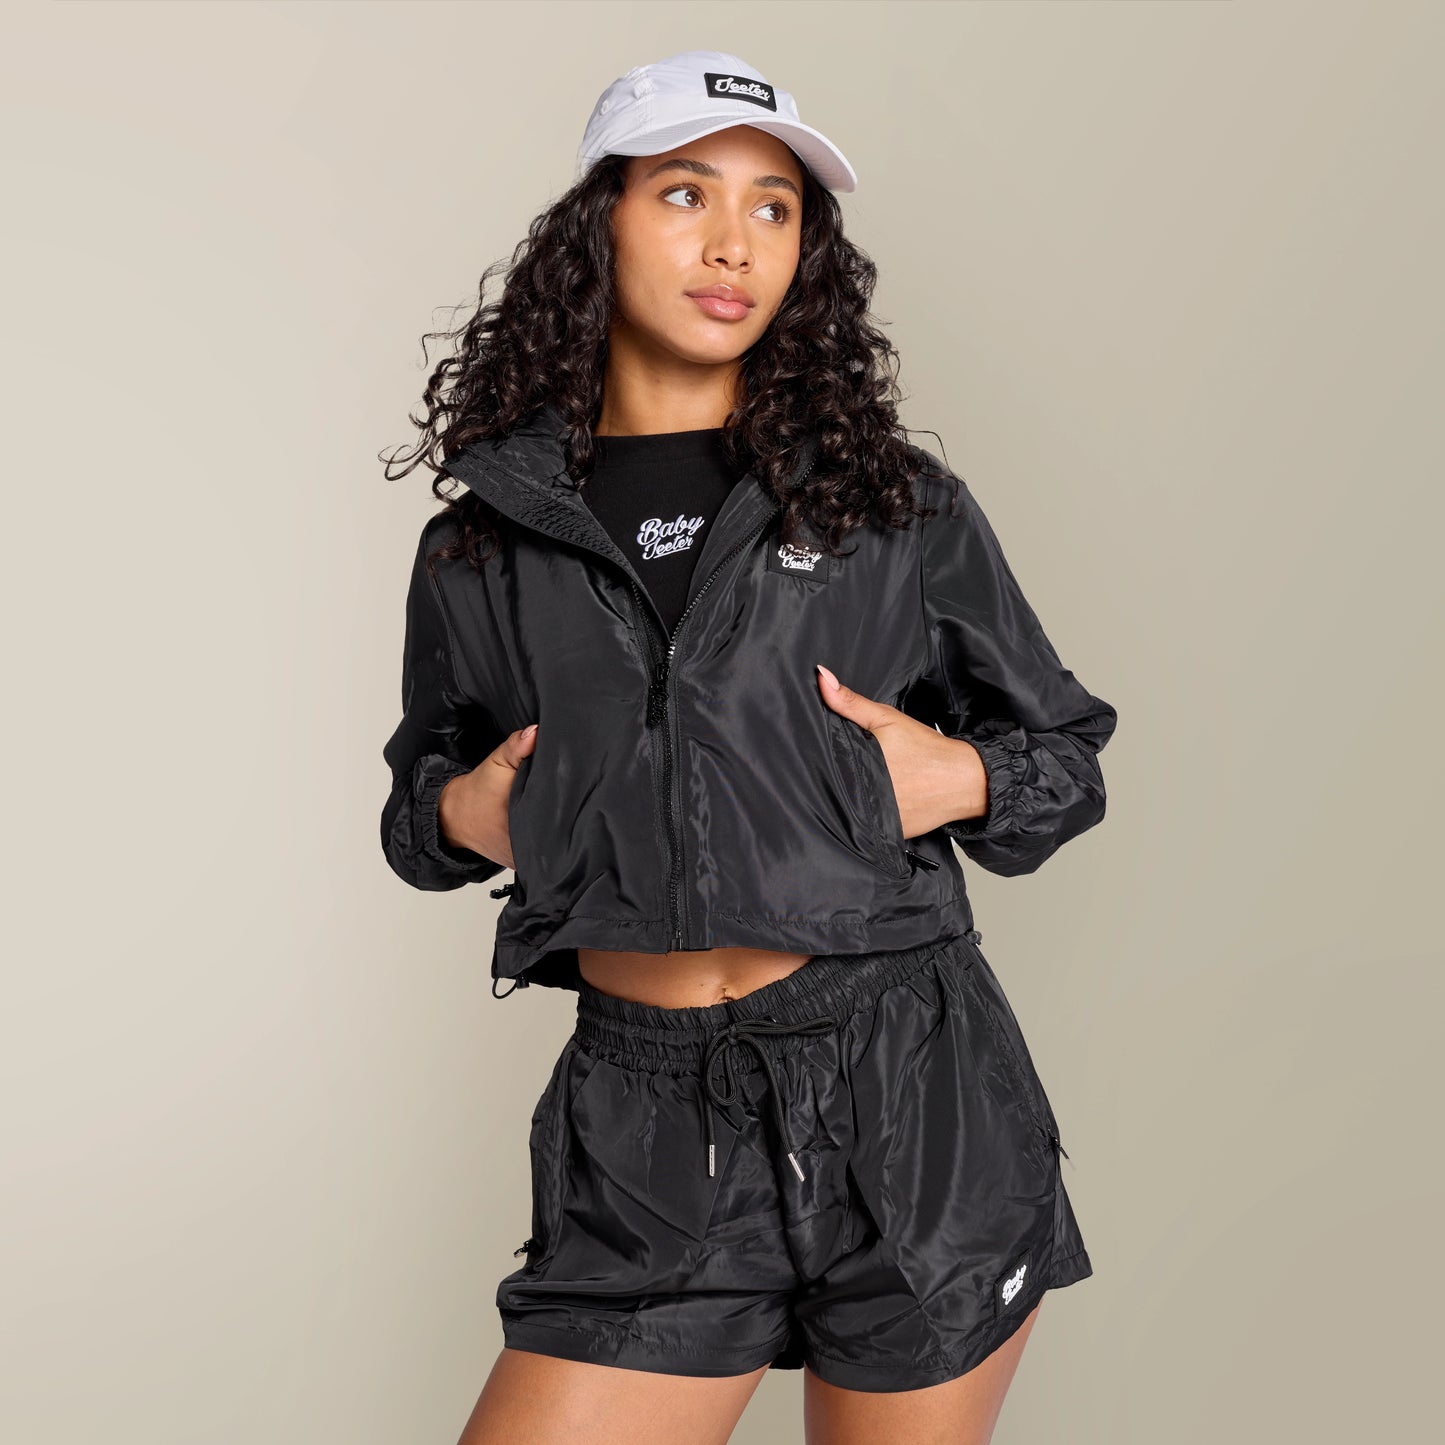 Jeeter for Her Performance Jacket - Black